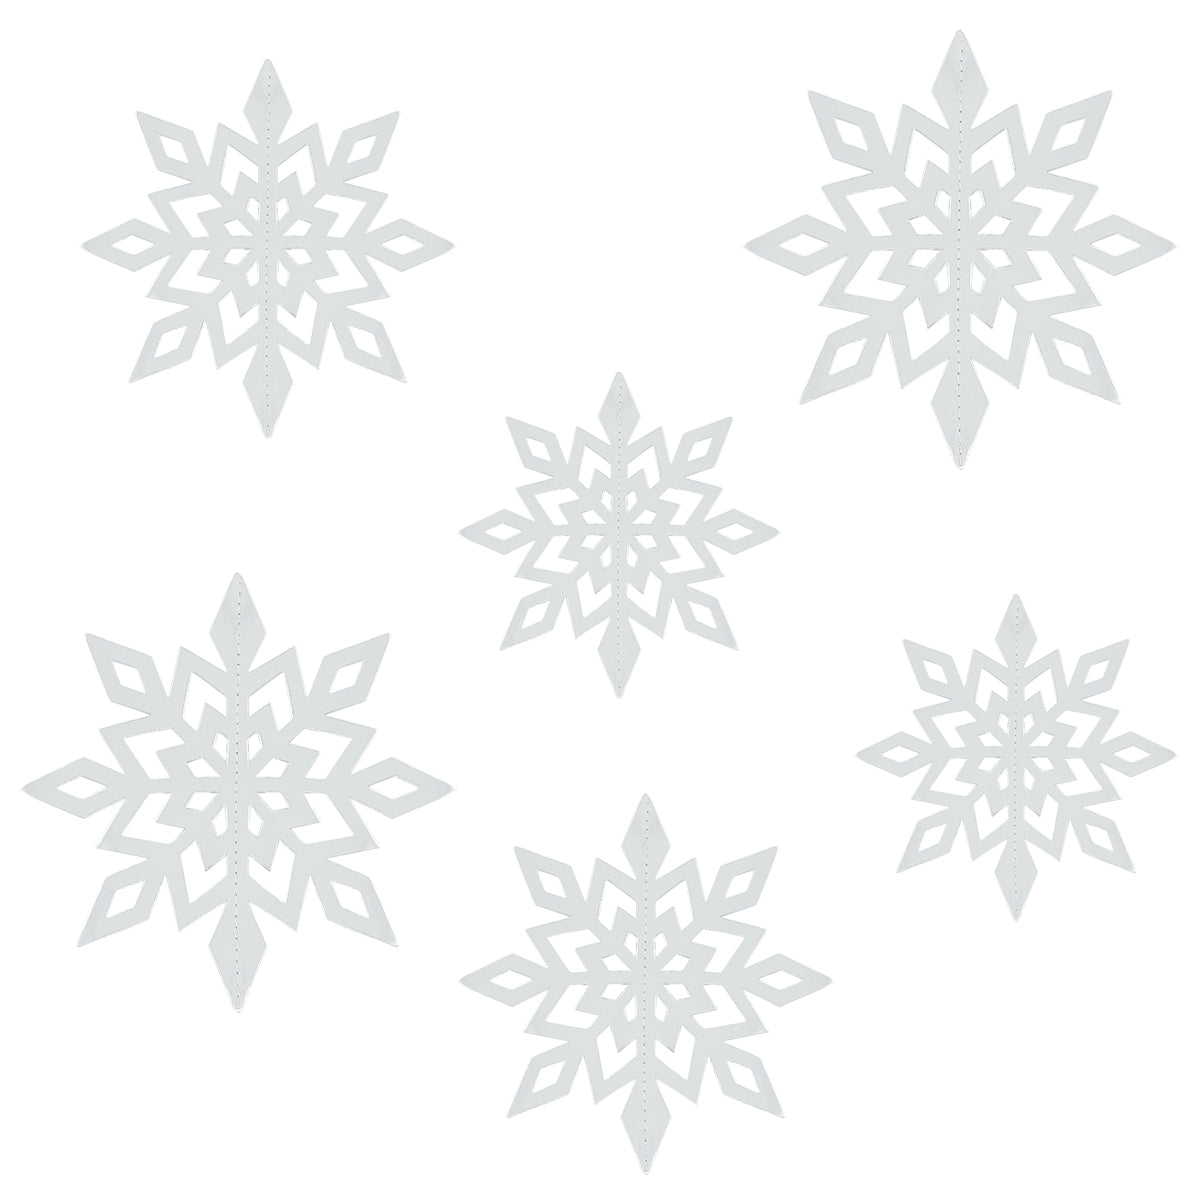 Mardi Gras Silver Snowflakes Christmas Ornaments 4 Pcs, Christmas Tree  Hanging Decorations for Holiday and Party